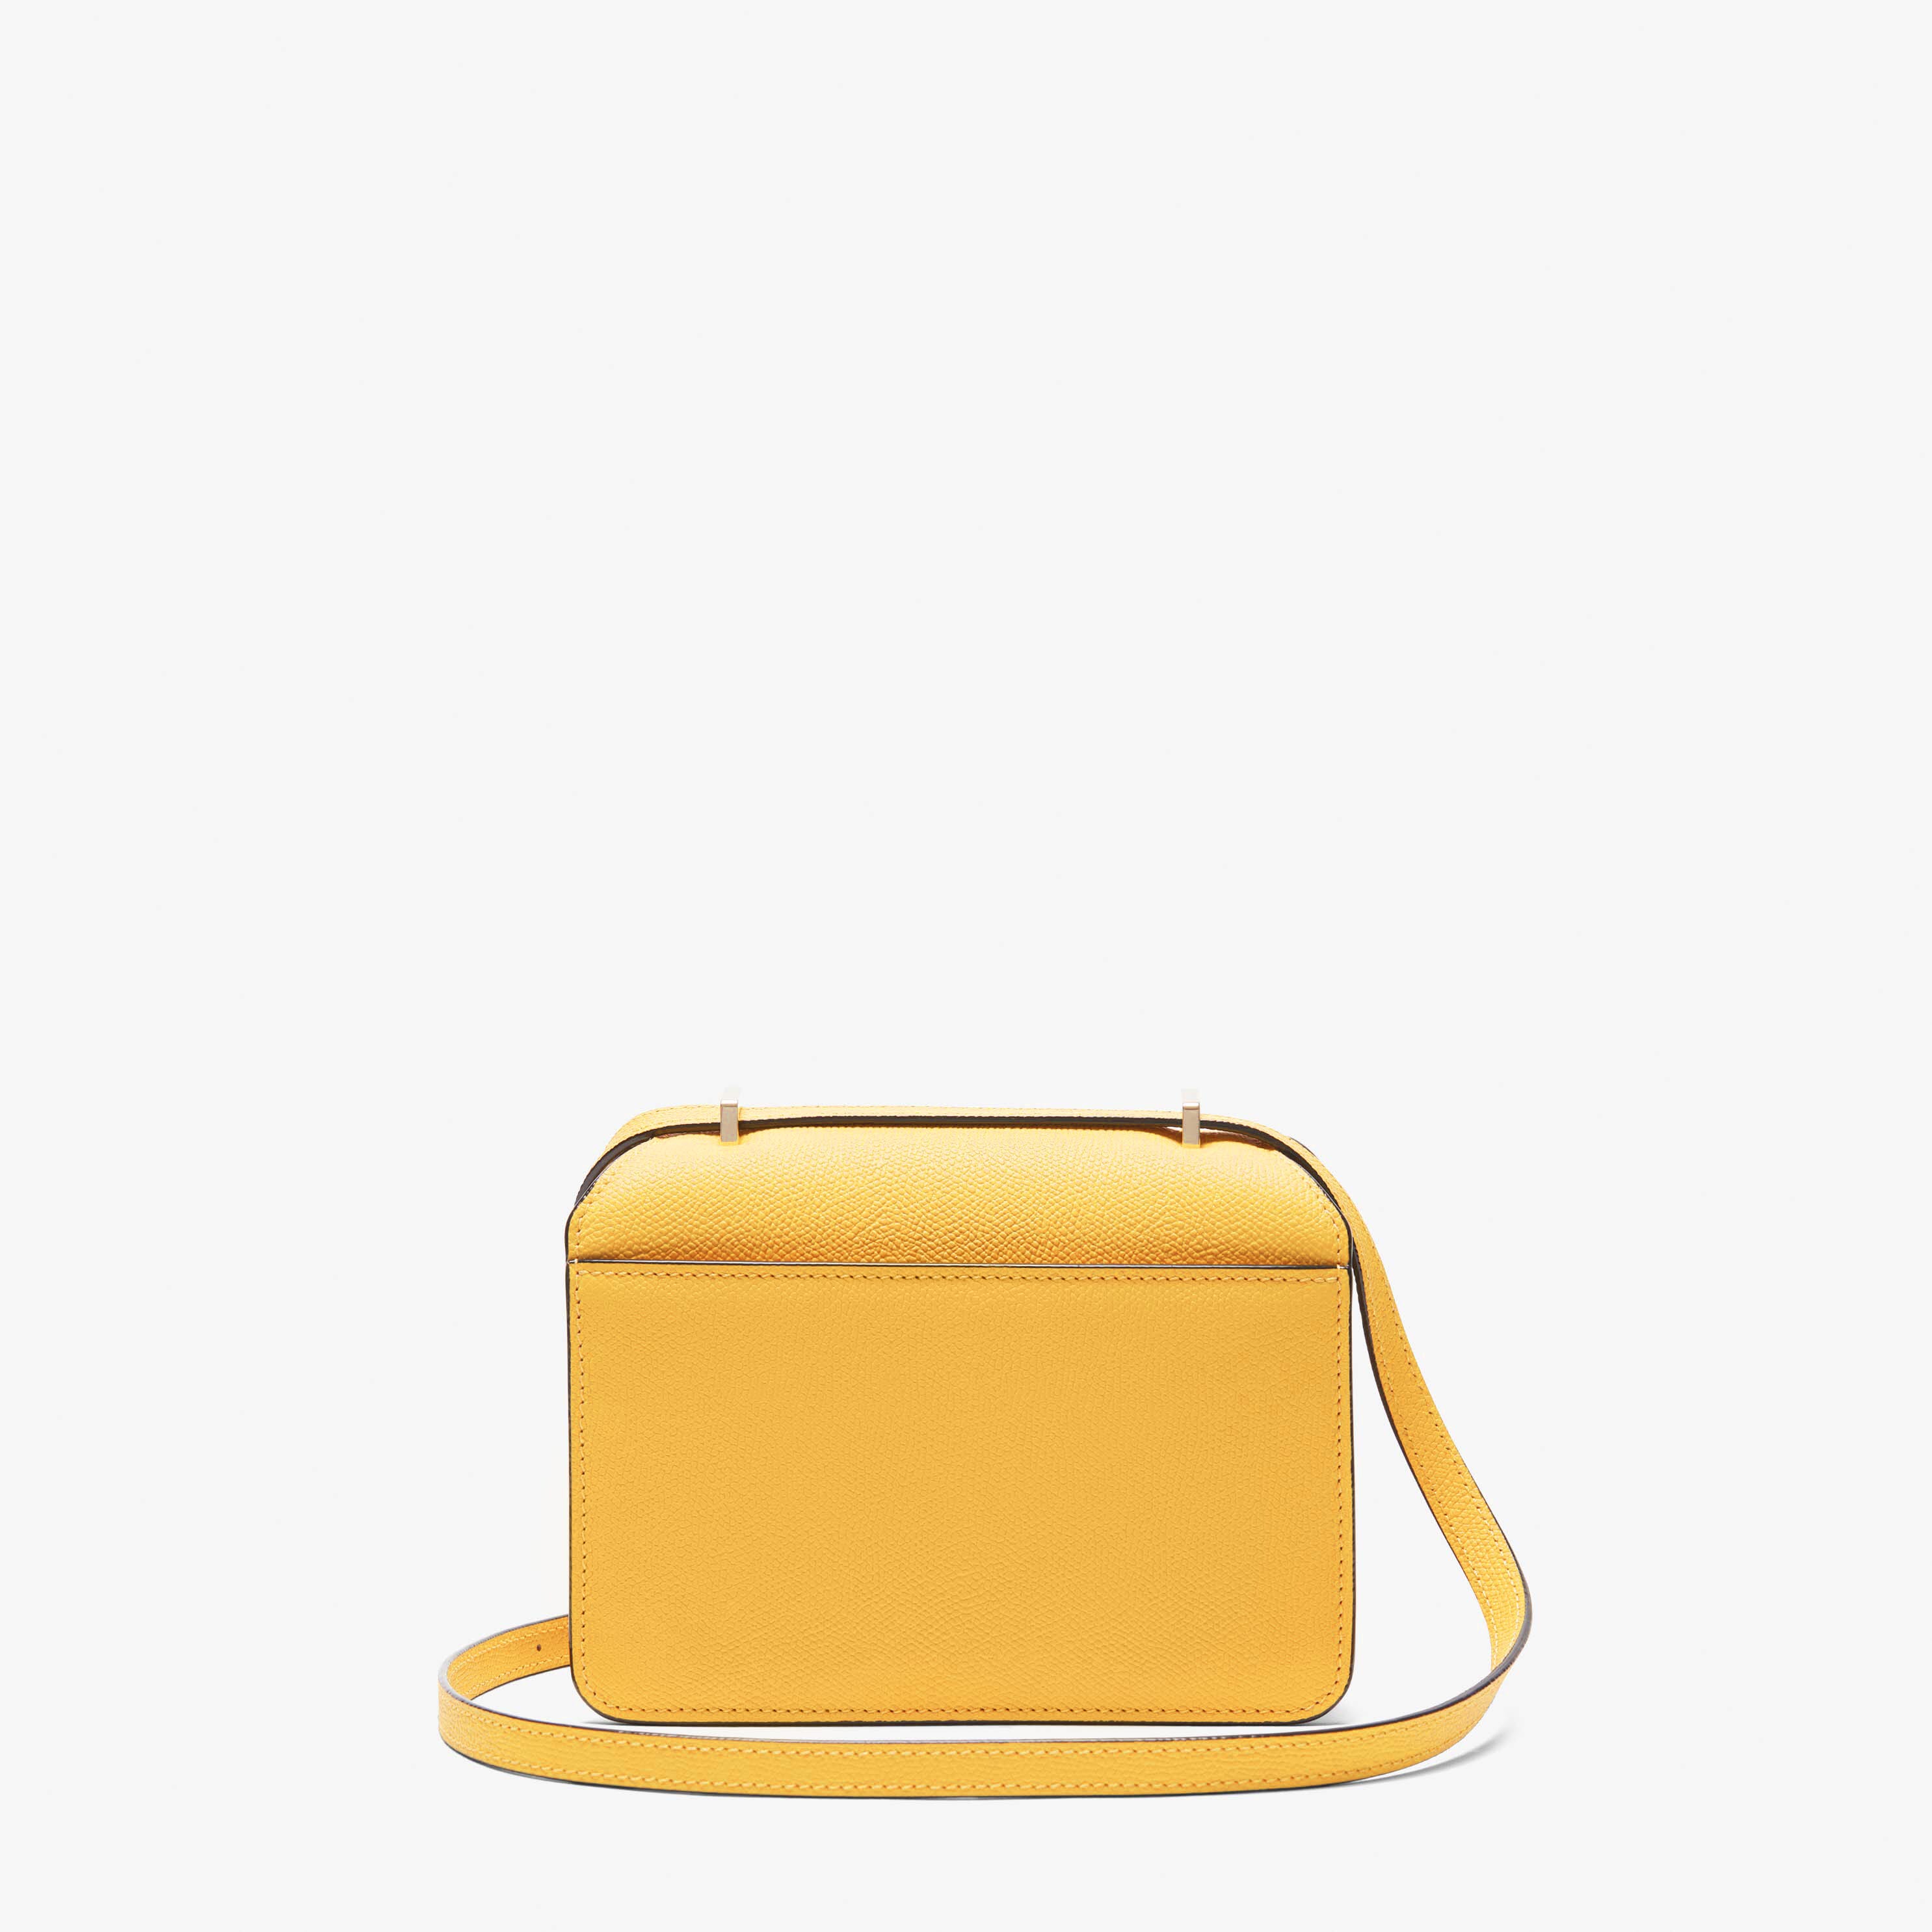 SMALL HANDBAG NOLO WITH FLAP CALF LEATHER VS LIGHT GOLD,JS,gallery